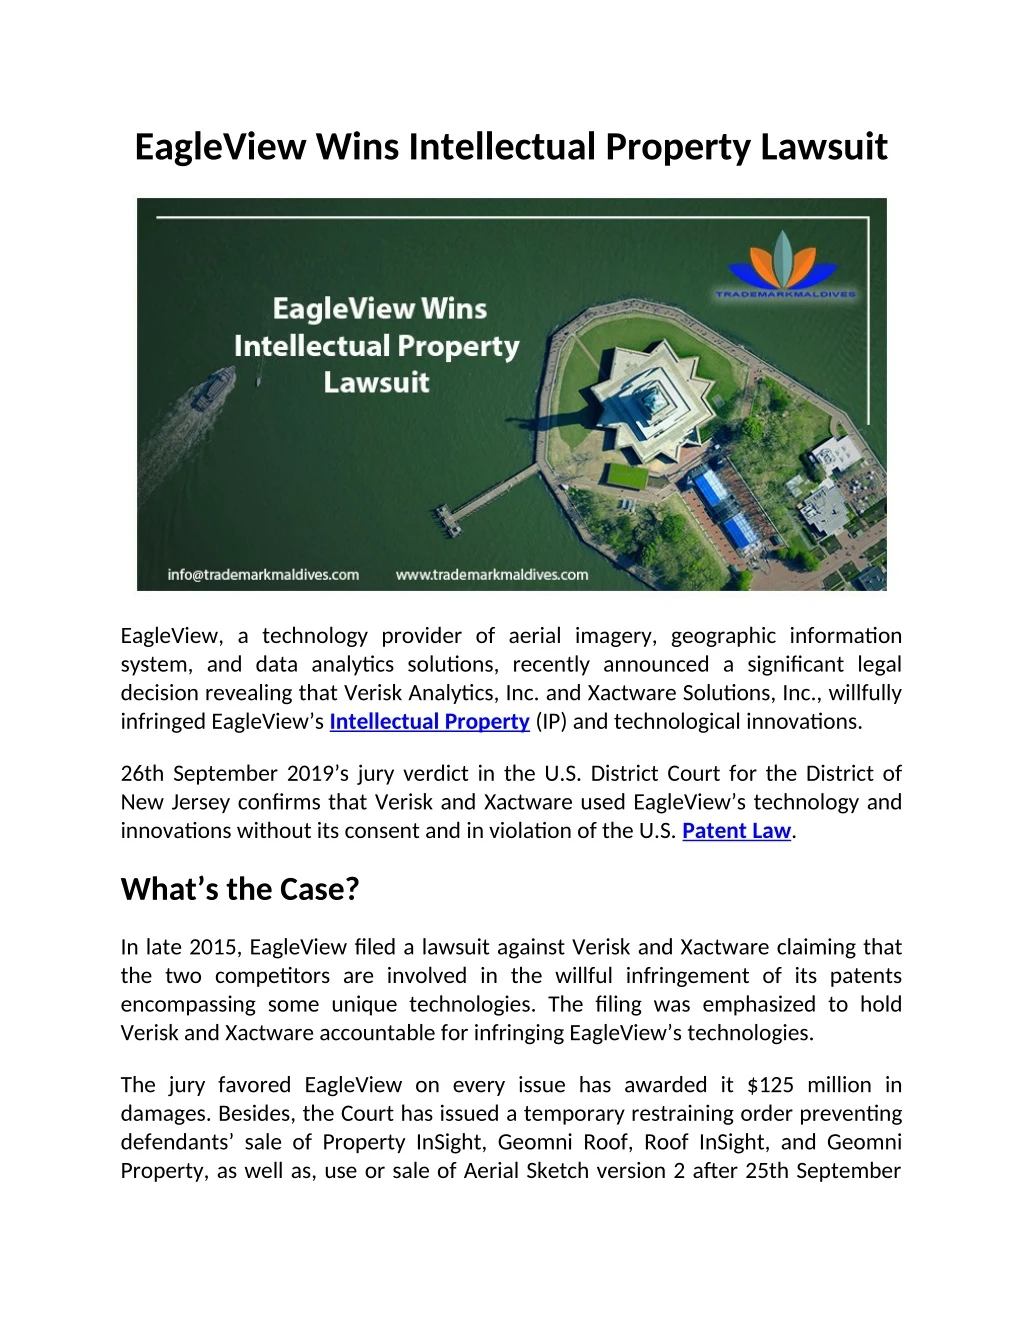 eagleview wins intellectual property lawsuit